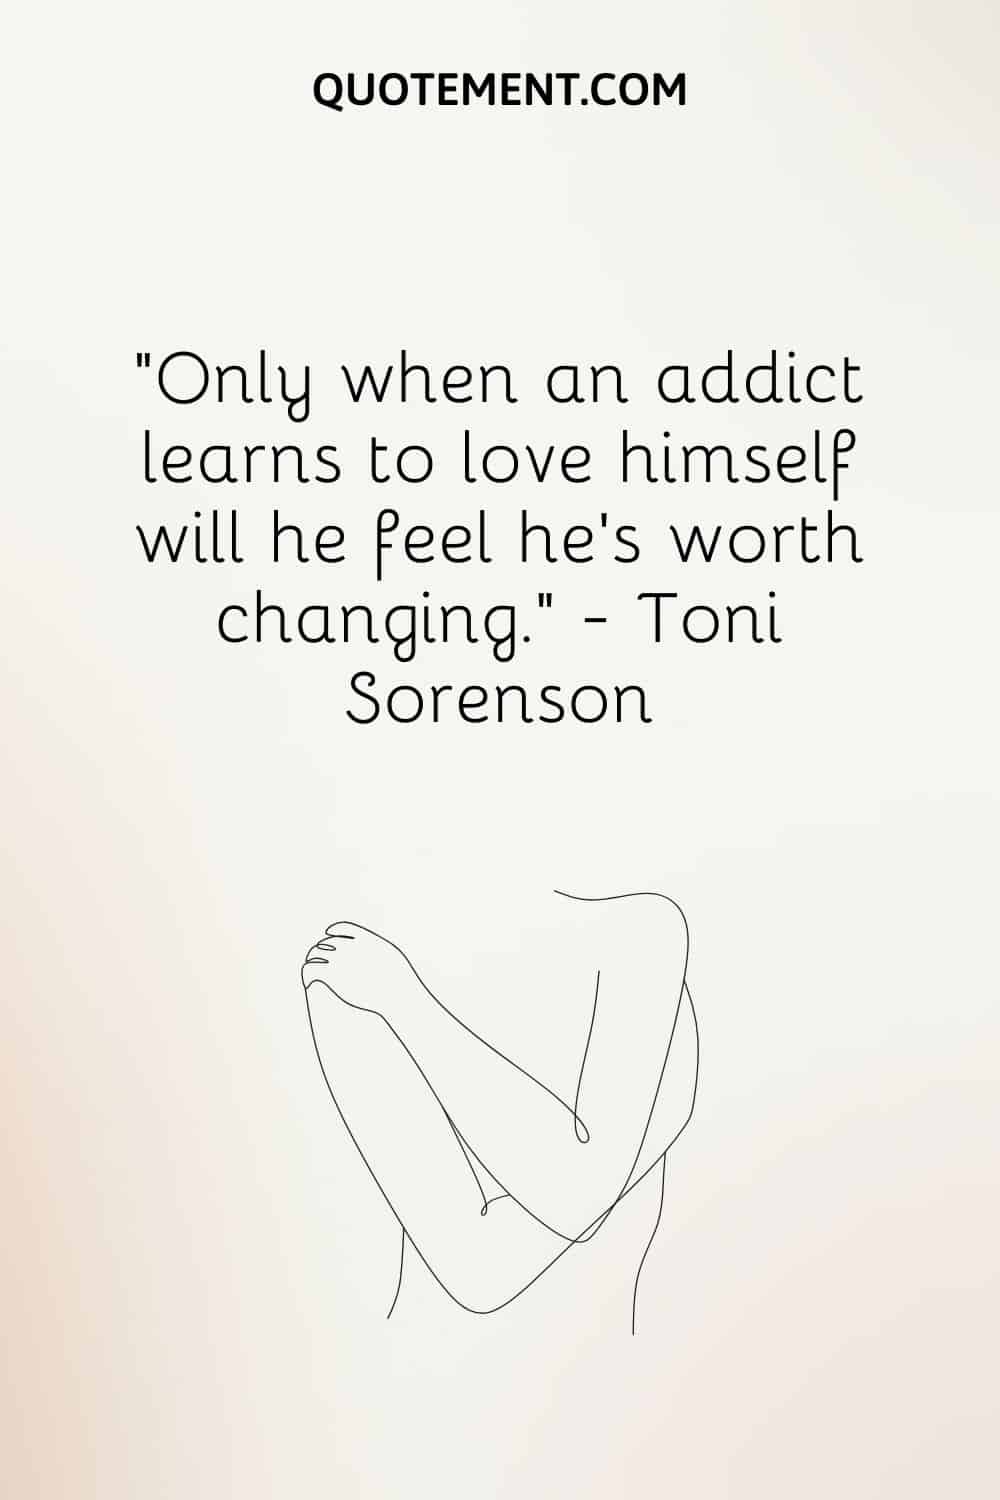 Only when an addict learns to love himself will he feel he’s worth changing